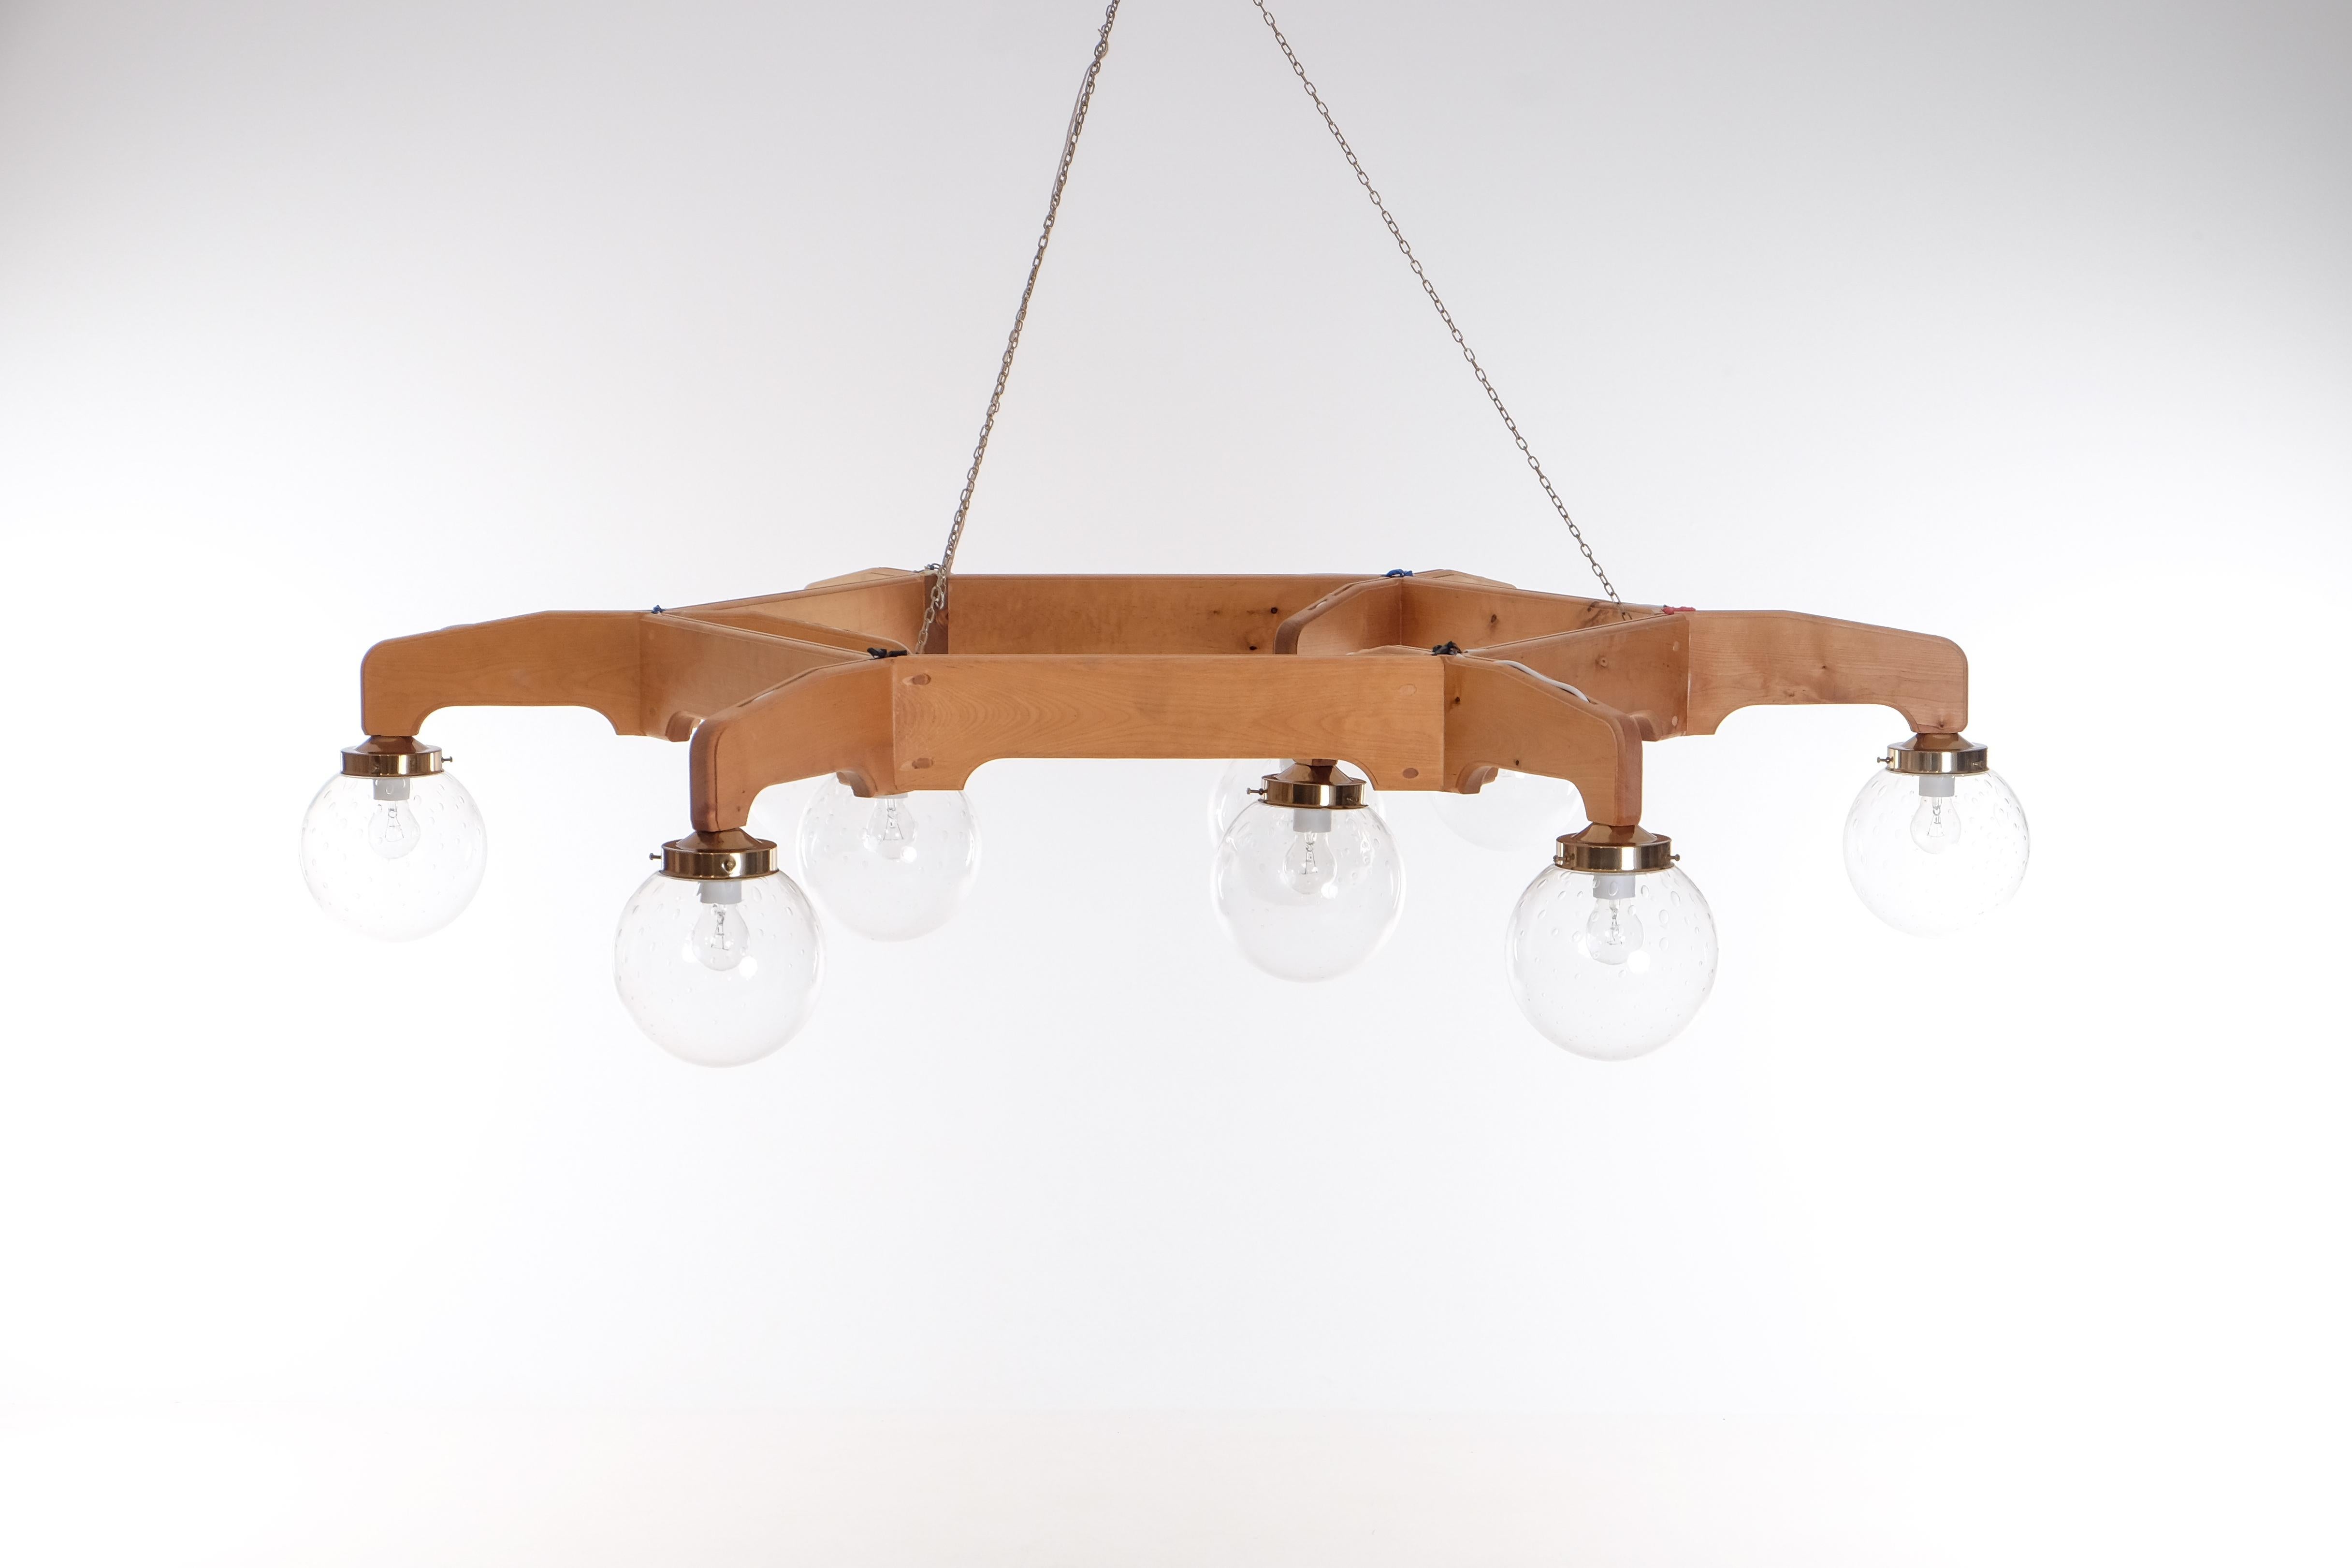 Glass Set of 4 Exceptional Swedish Ceiling Lights in pine, 1970s For Sale